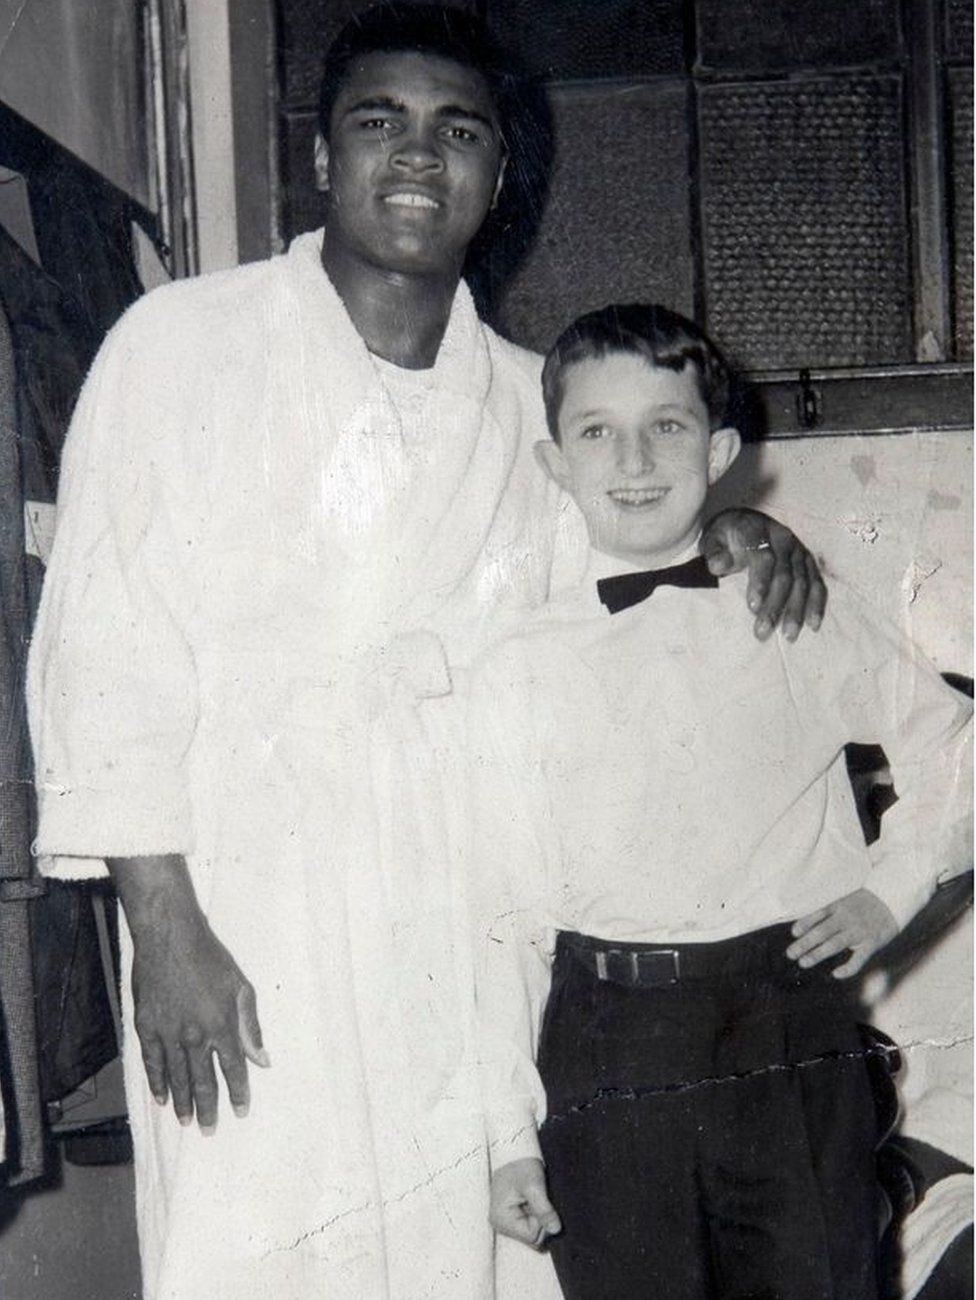 Muhammad Ali and Tommy Gilmour in 1965